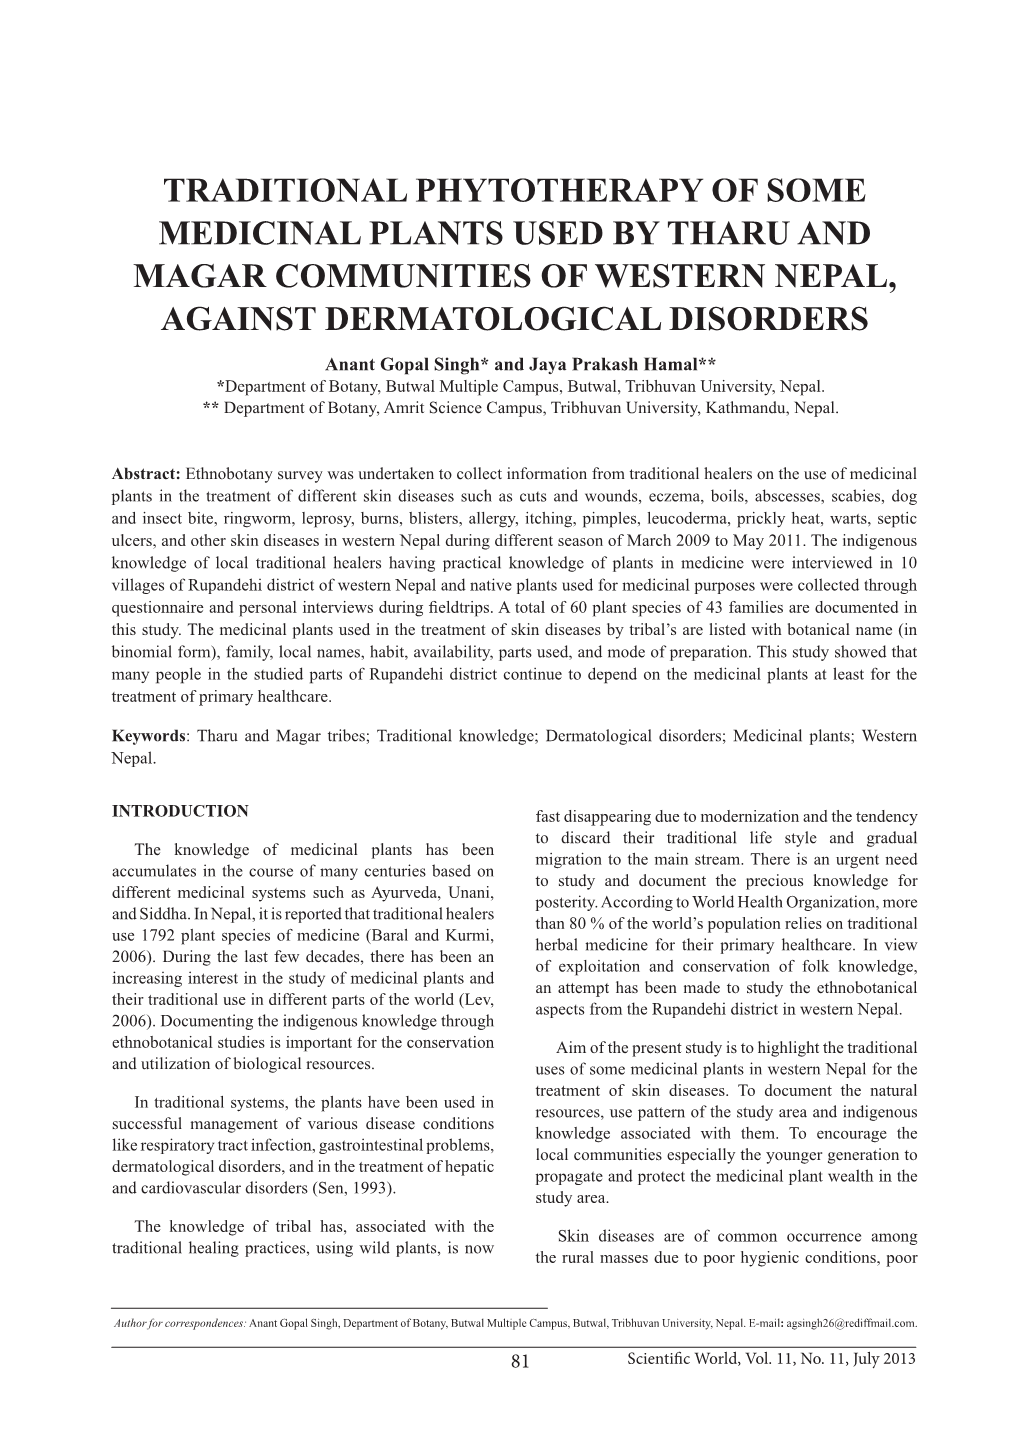 Traditional Phytotherapy of Some Medicinal Plants Used by Tharu and Magar Communities of Western Nepal, Against Dermatological D